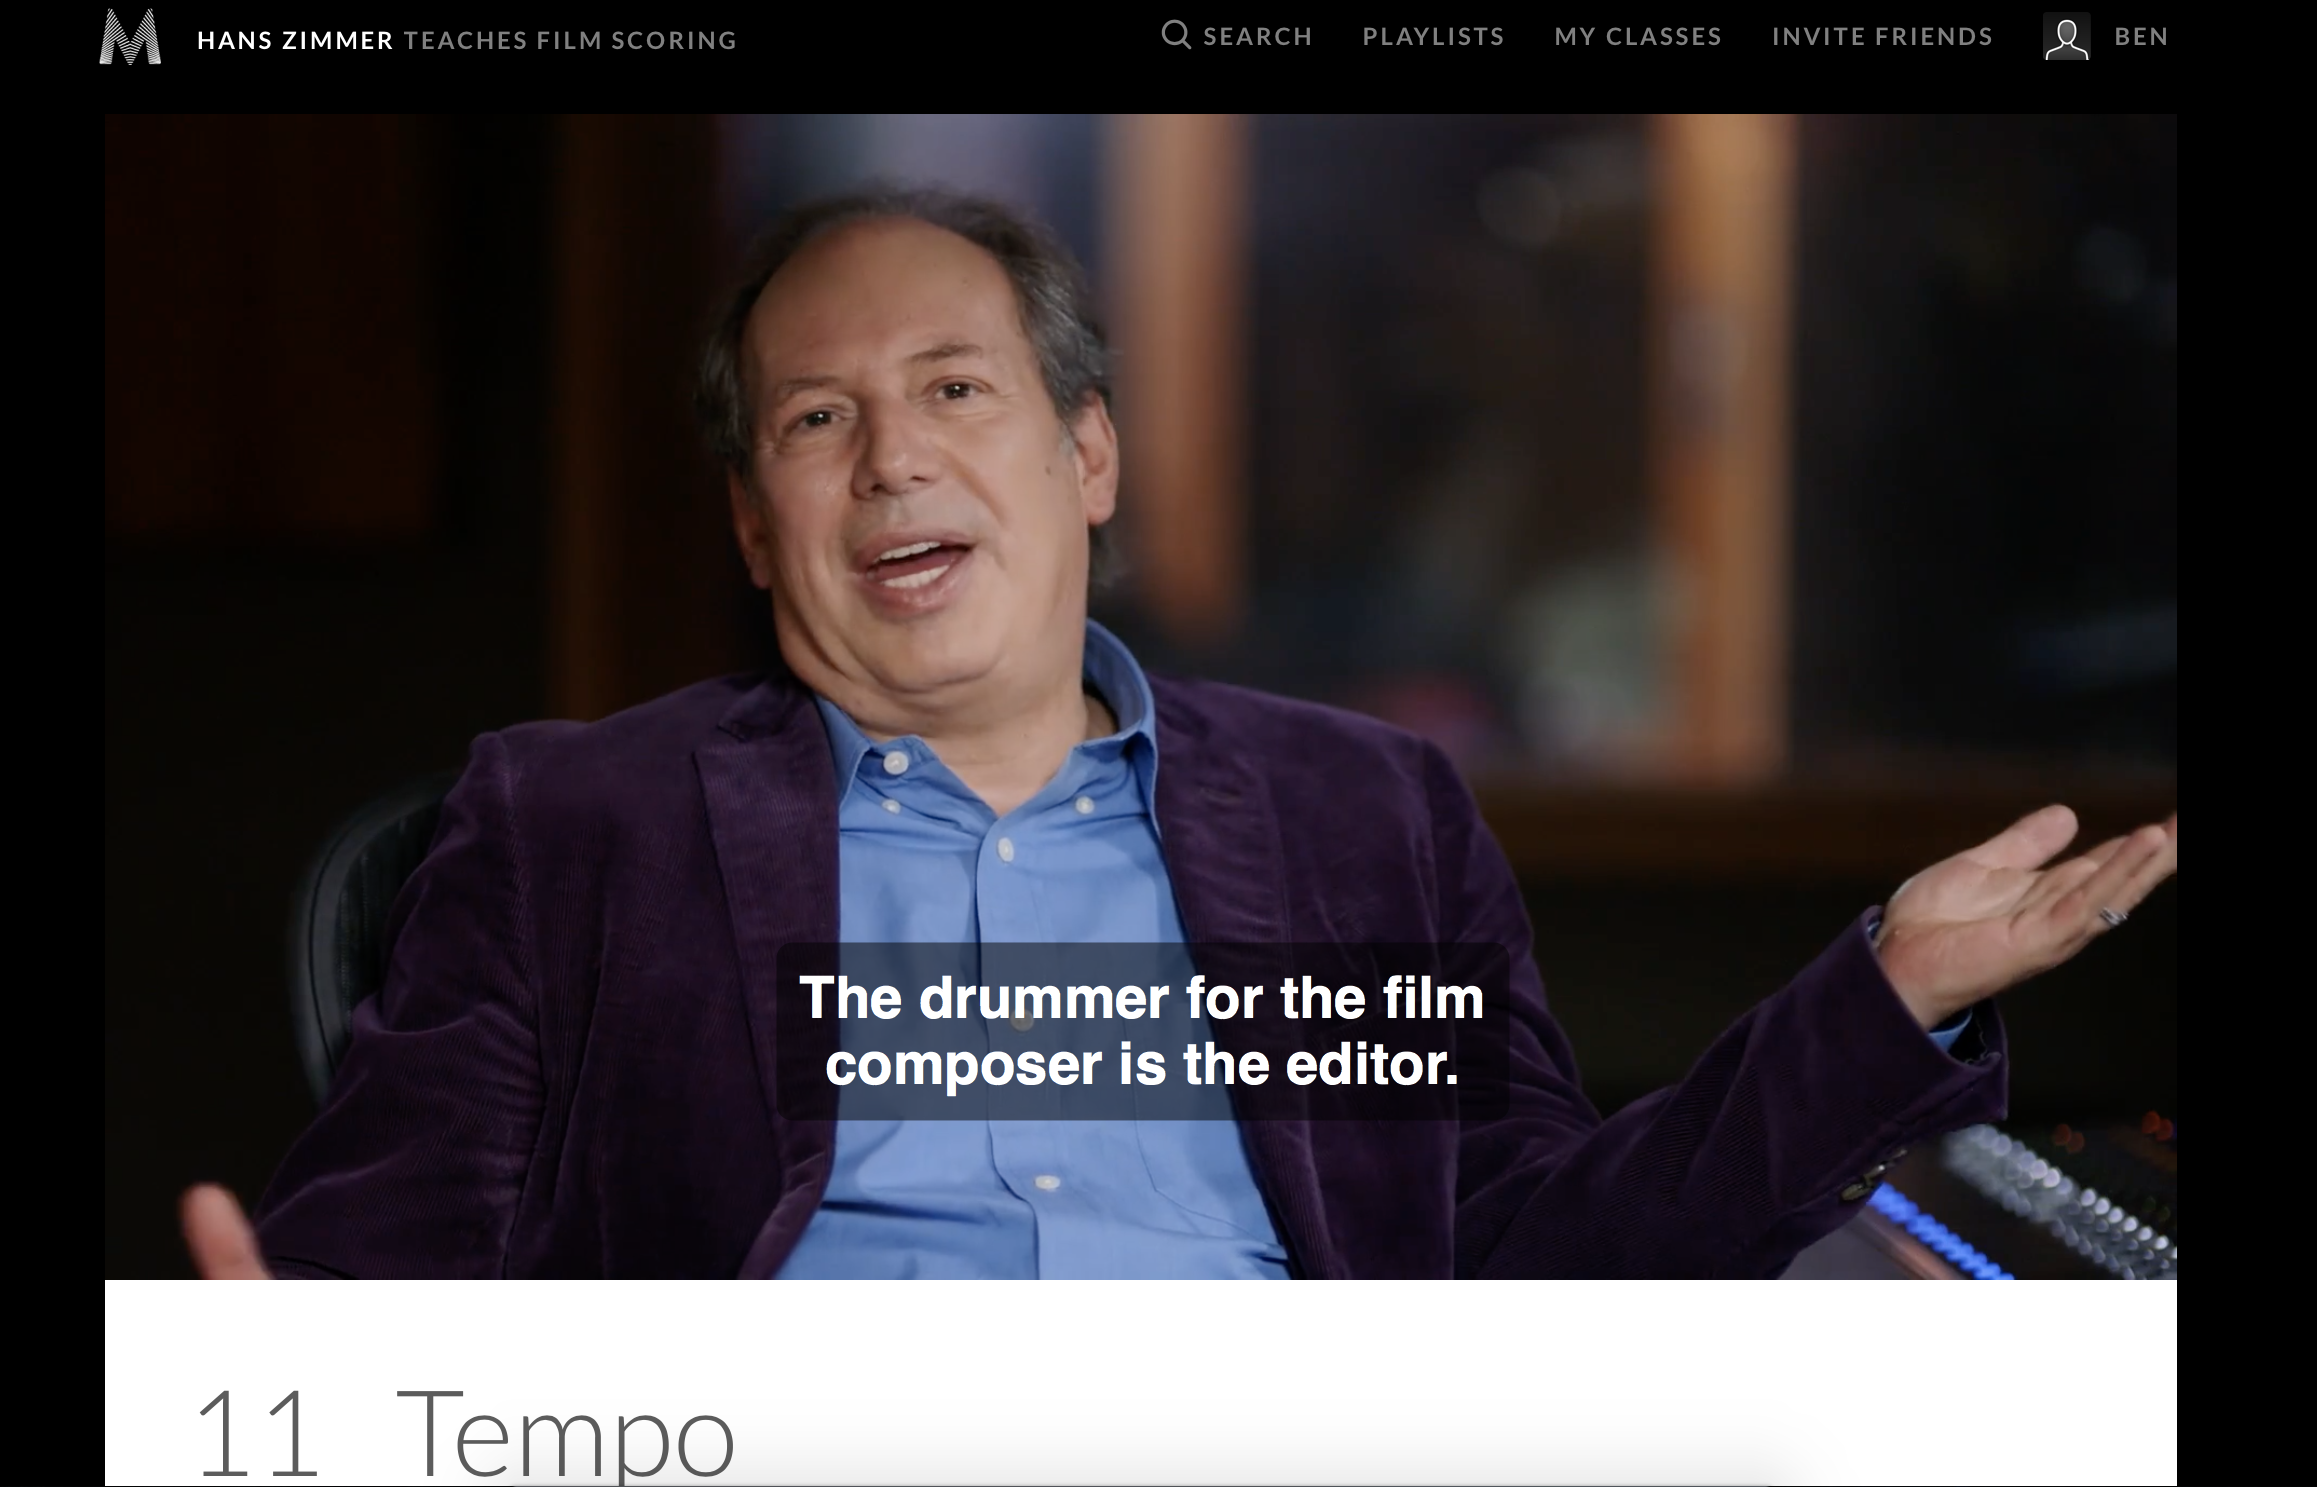 hans zimmer masterclass review is it worth it